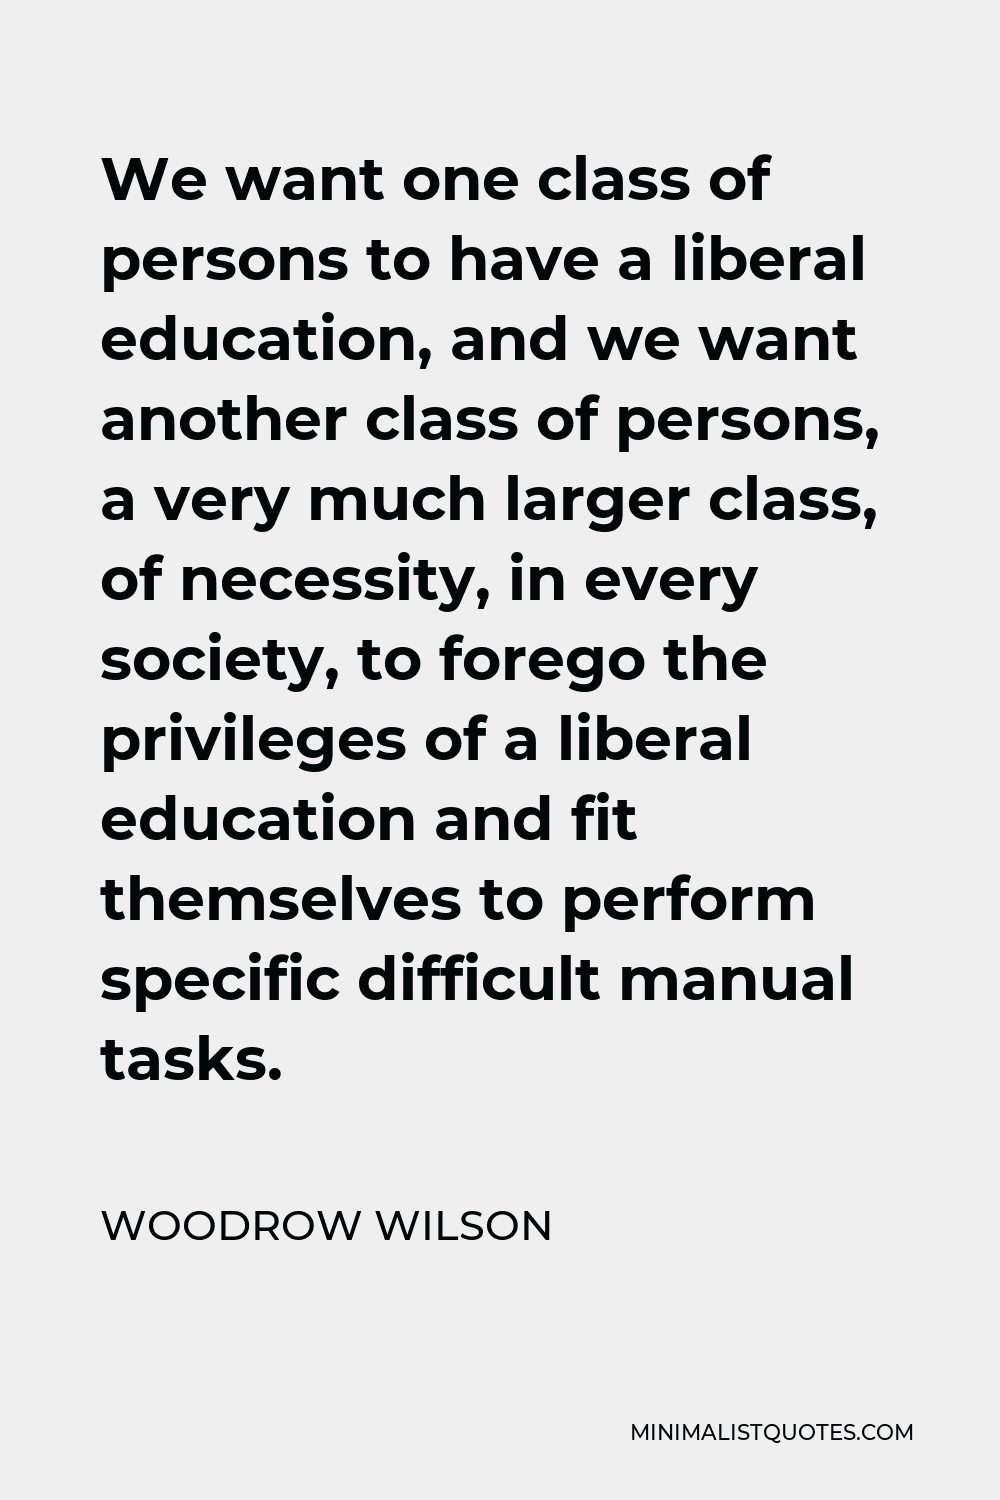 Woodrow Wilson Quote - We want one class of persons to have a liberal education, and we want another class of persons, a very much larger class, of necessity, in every society, to forego the privileges of a liberal education and fit themselves to perform specific difficult manual tasks.